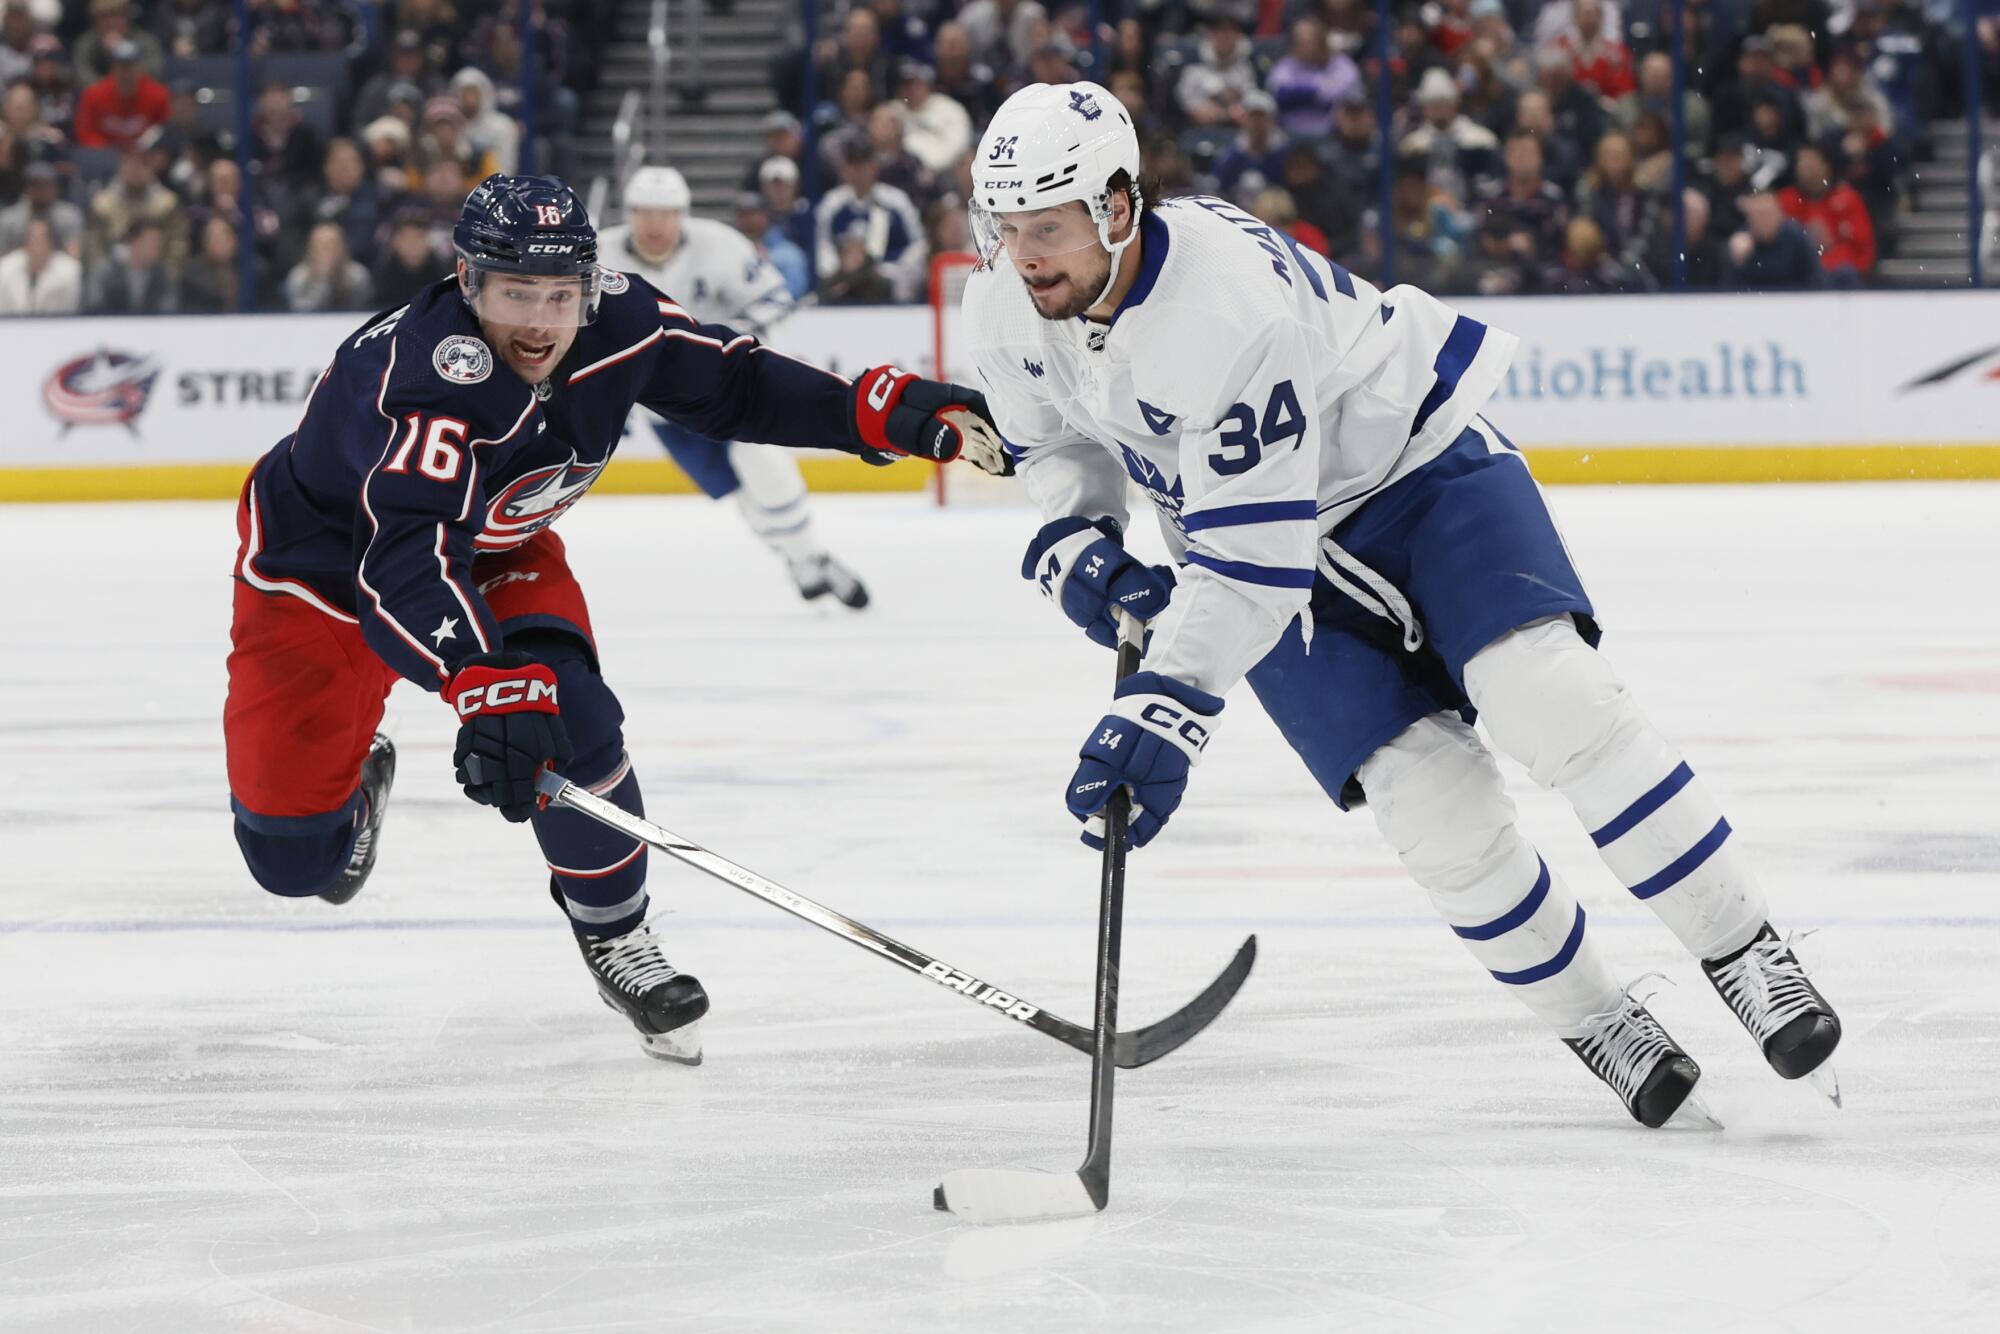 The Blue Jackets' Brendan Gaunce chases the Maple Leafs' Auston Matthews across the blue line during a game